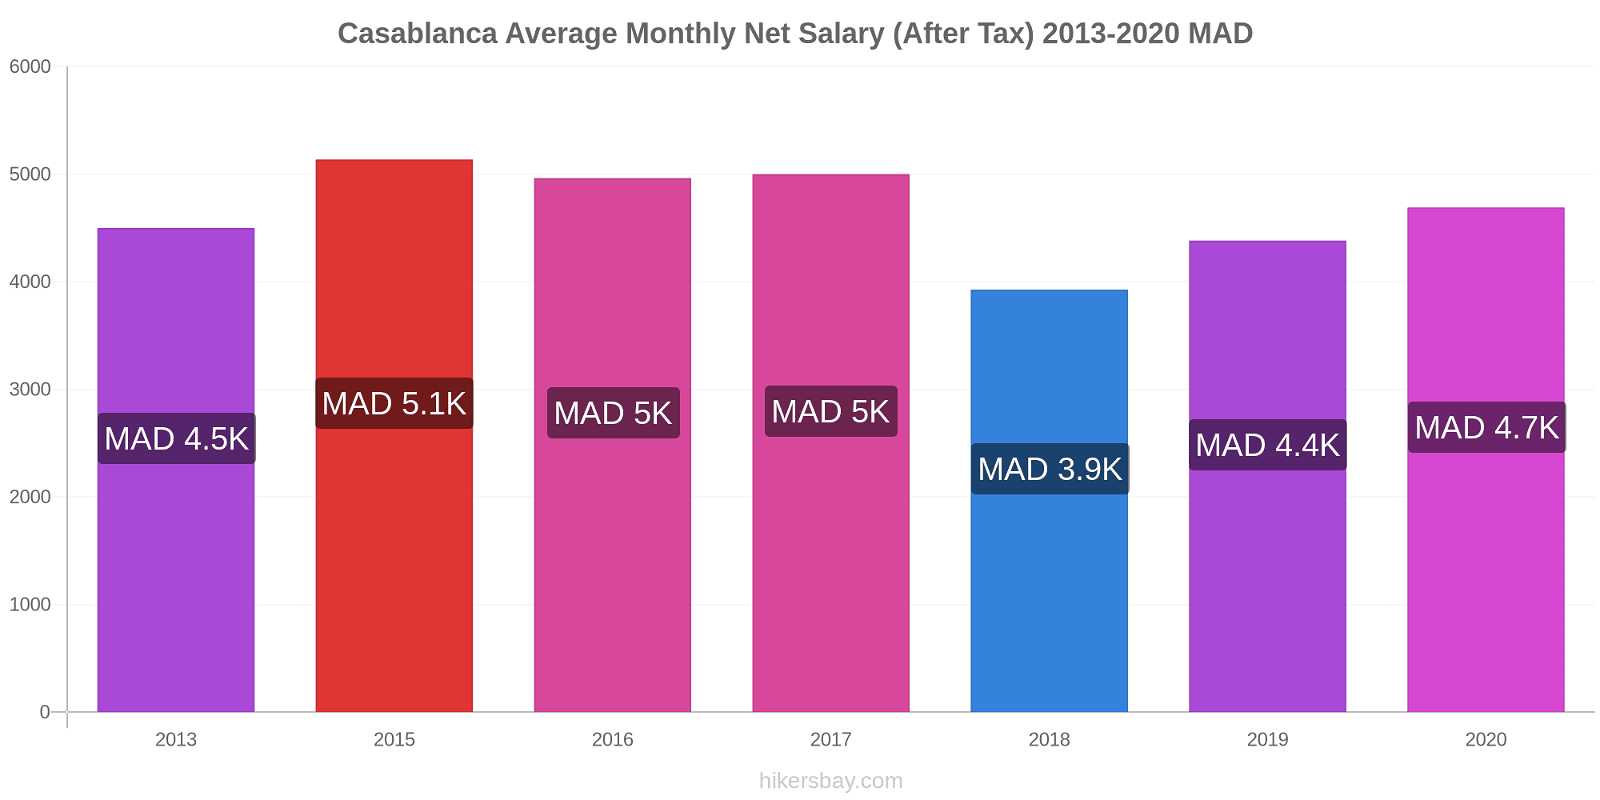 Casablanca price changes Average Monthly Net Salary (After Tax) hikersbay.com